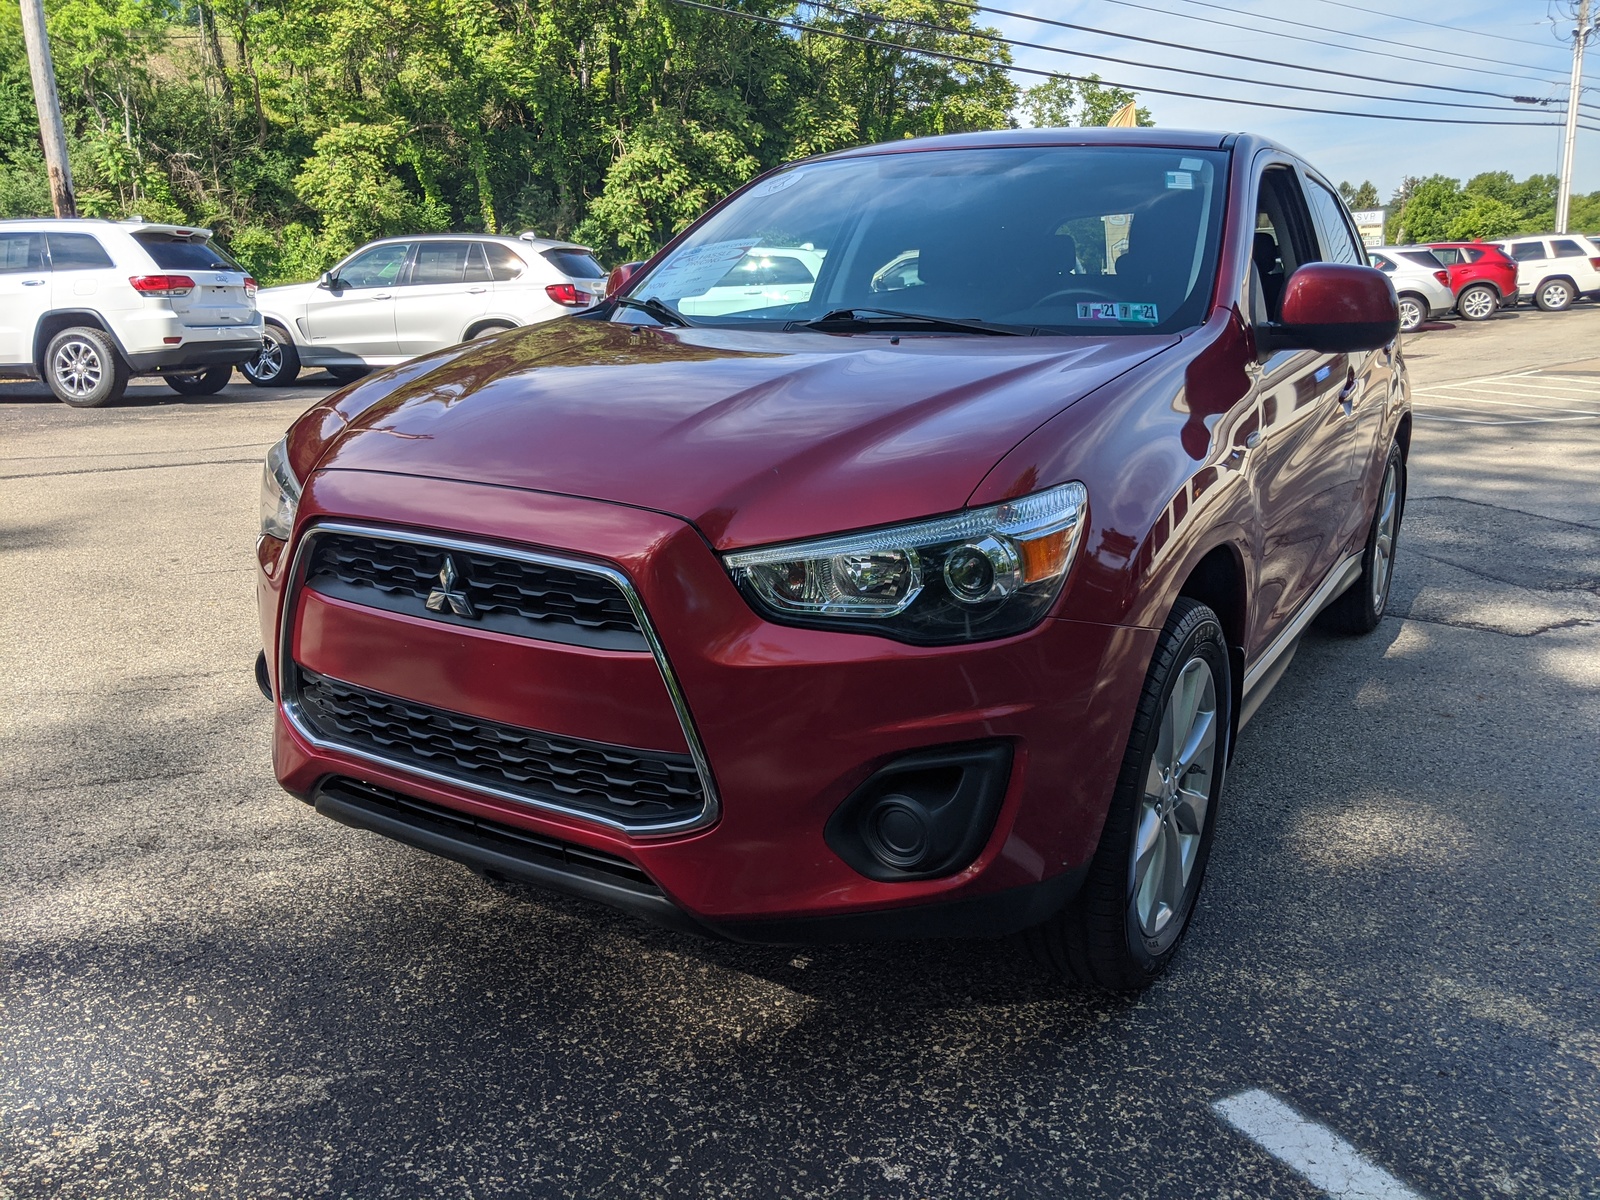 Pre-Owned 2015 Mitsubishi Outlander Sport ES in Rally Red Metallic ...